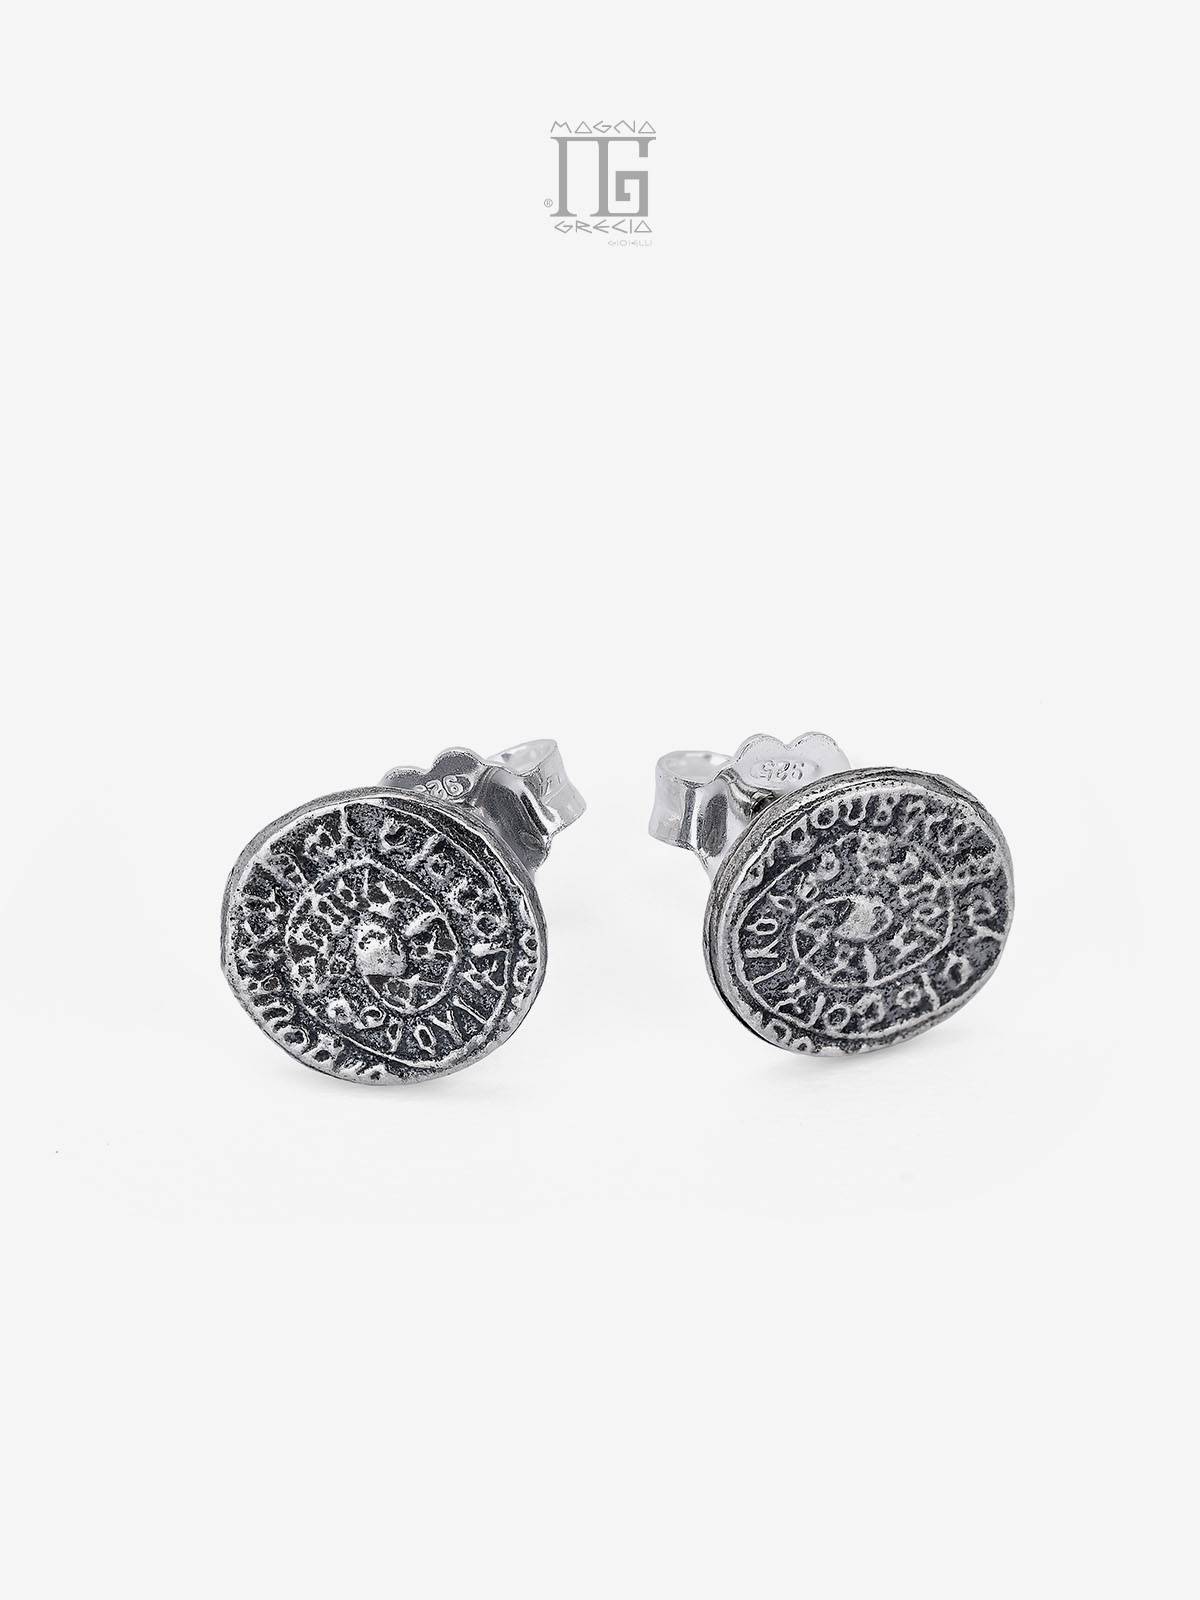 Silver earrings with Phaistos Disc coin Code MGK 4243 V